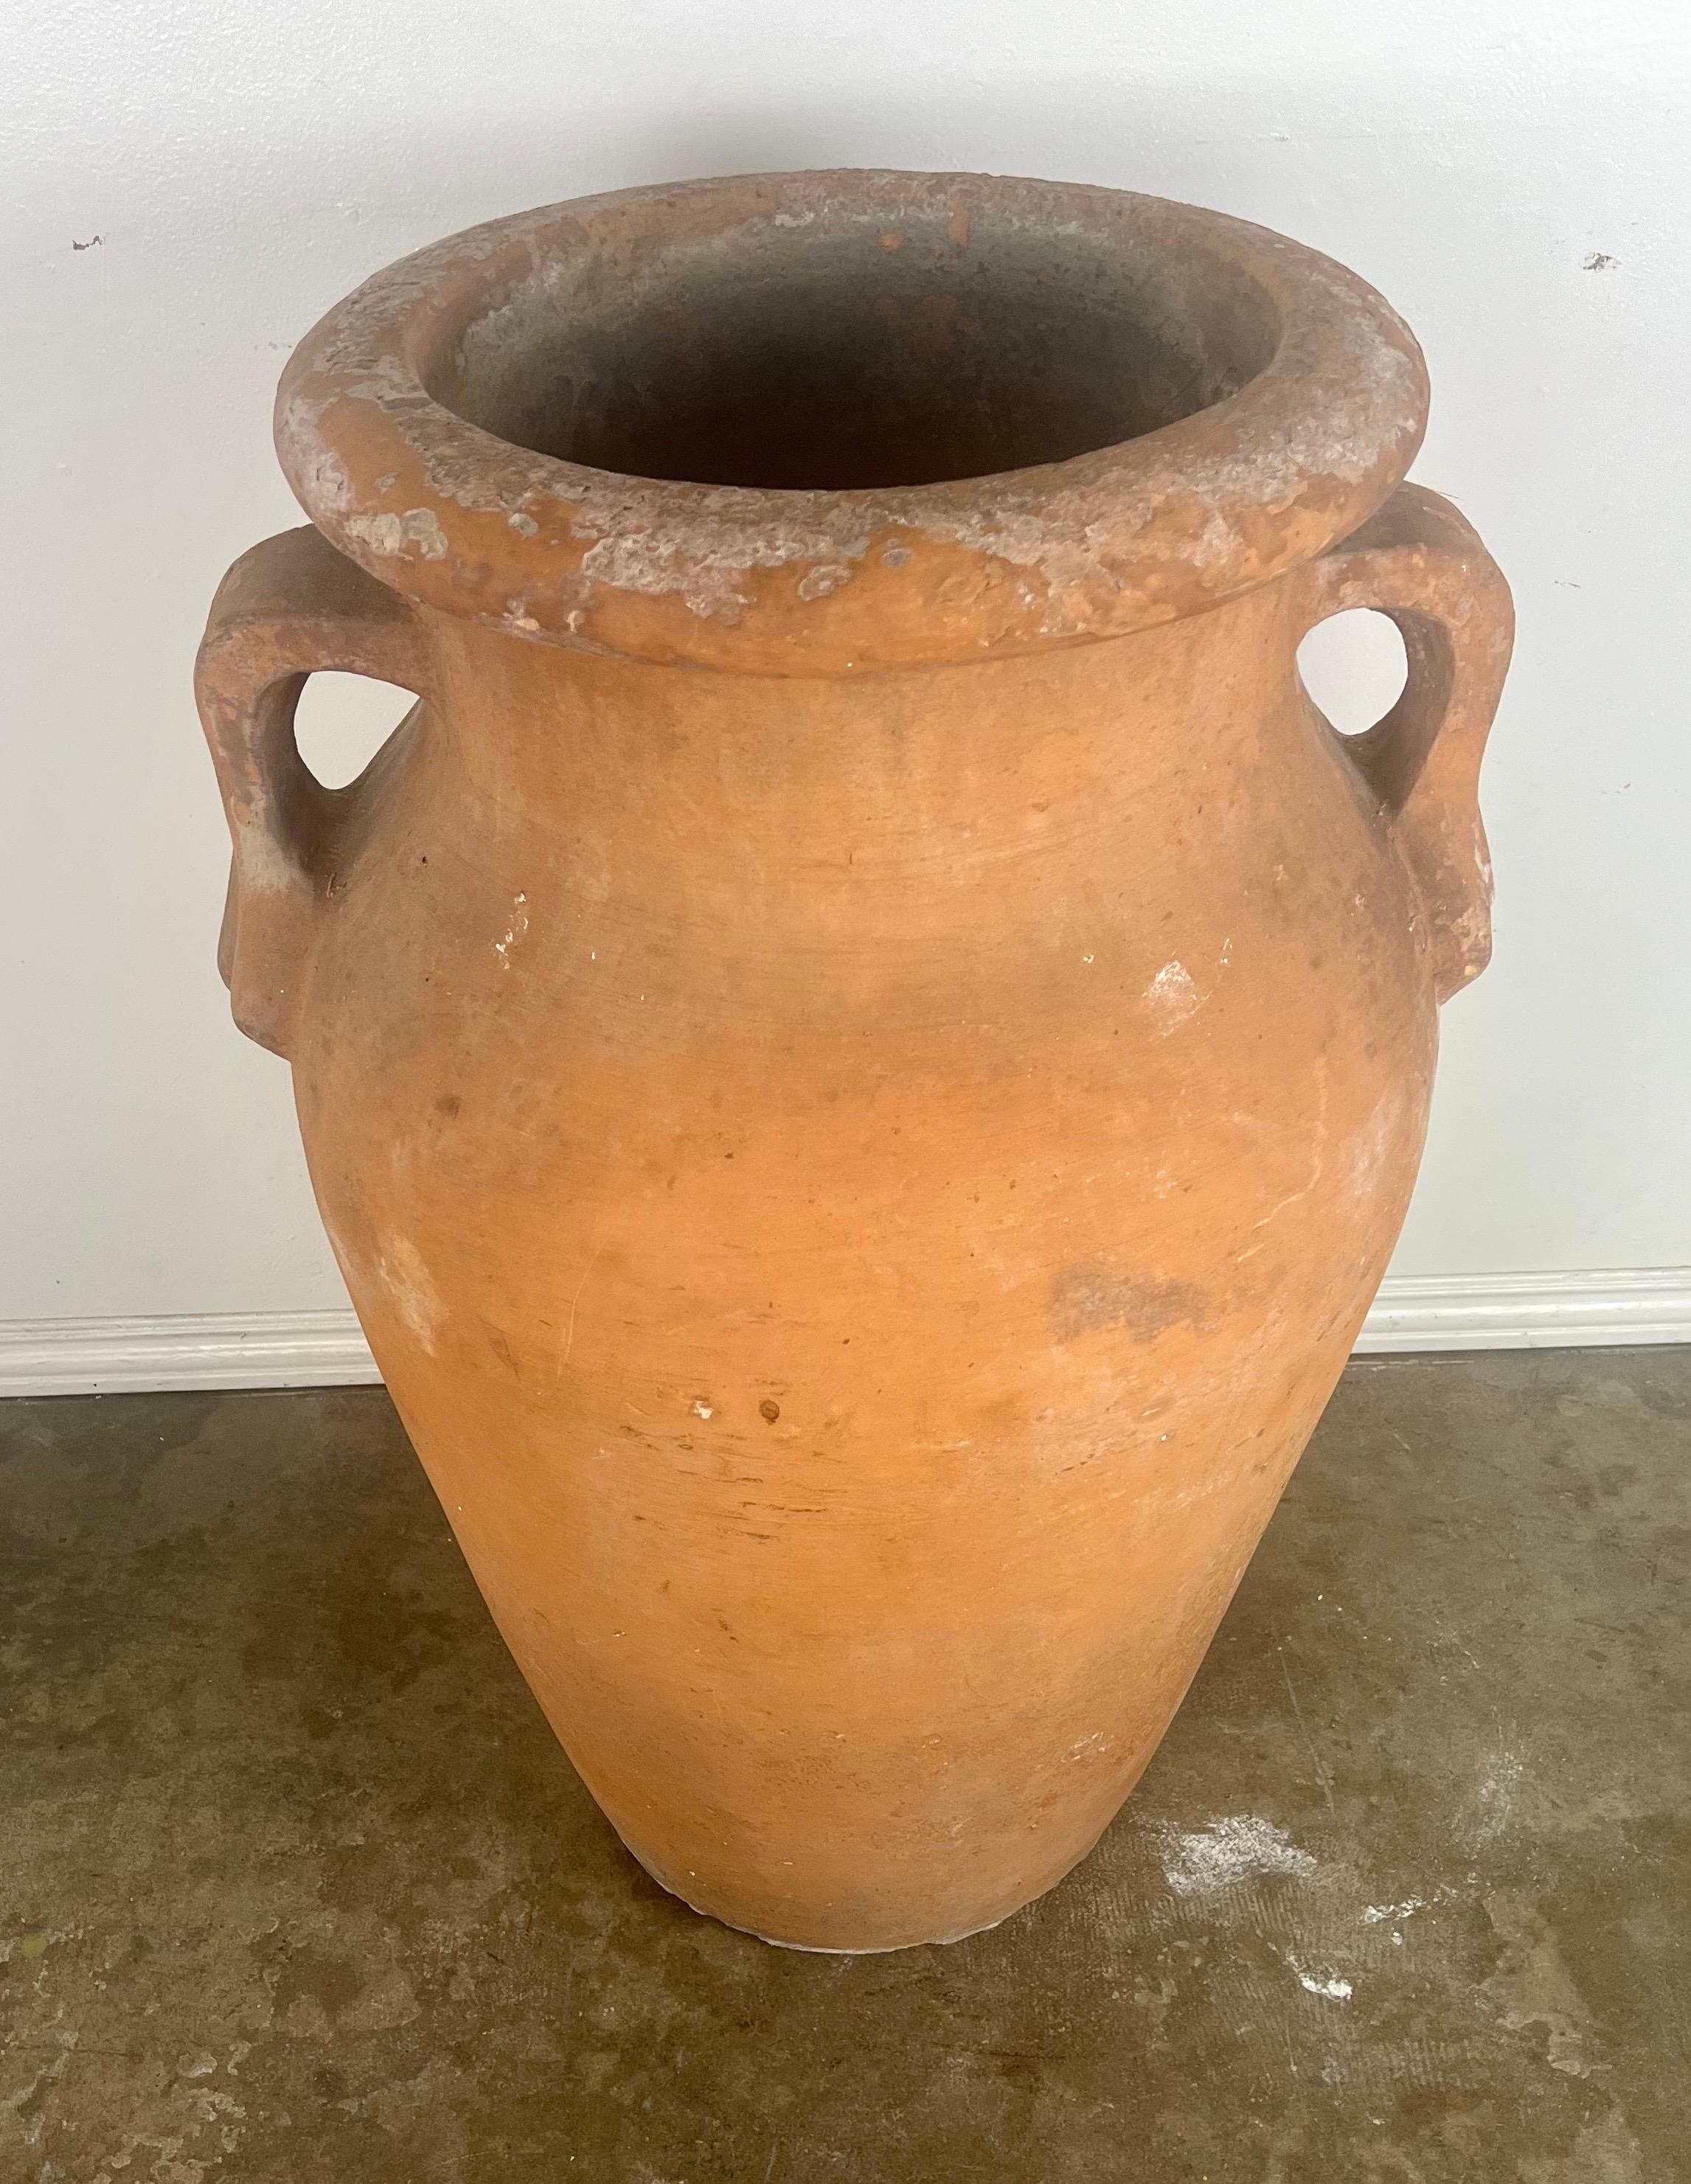 This large terracotta planter is a splendid choice for those who appreciate classical aesthetics melded with practical design.  The addition of handles on both sides not only enhances its functionality, making it easier to move, but also contributes